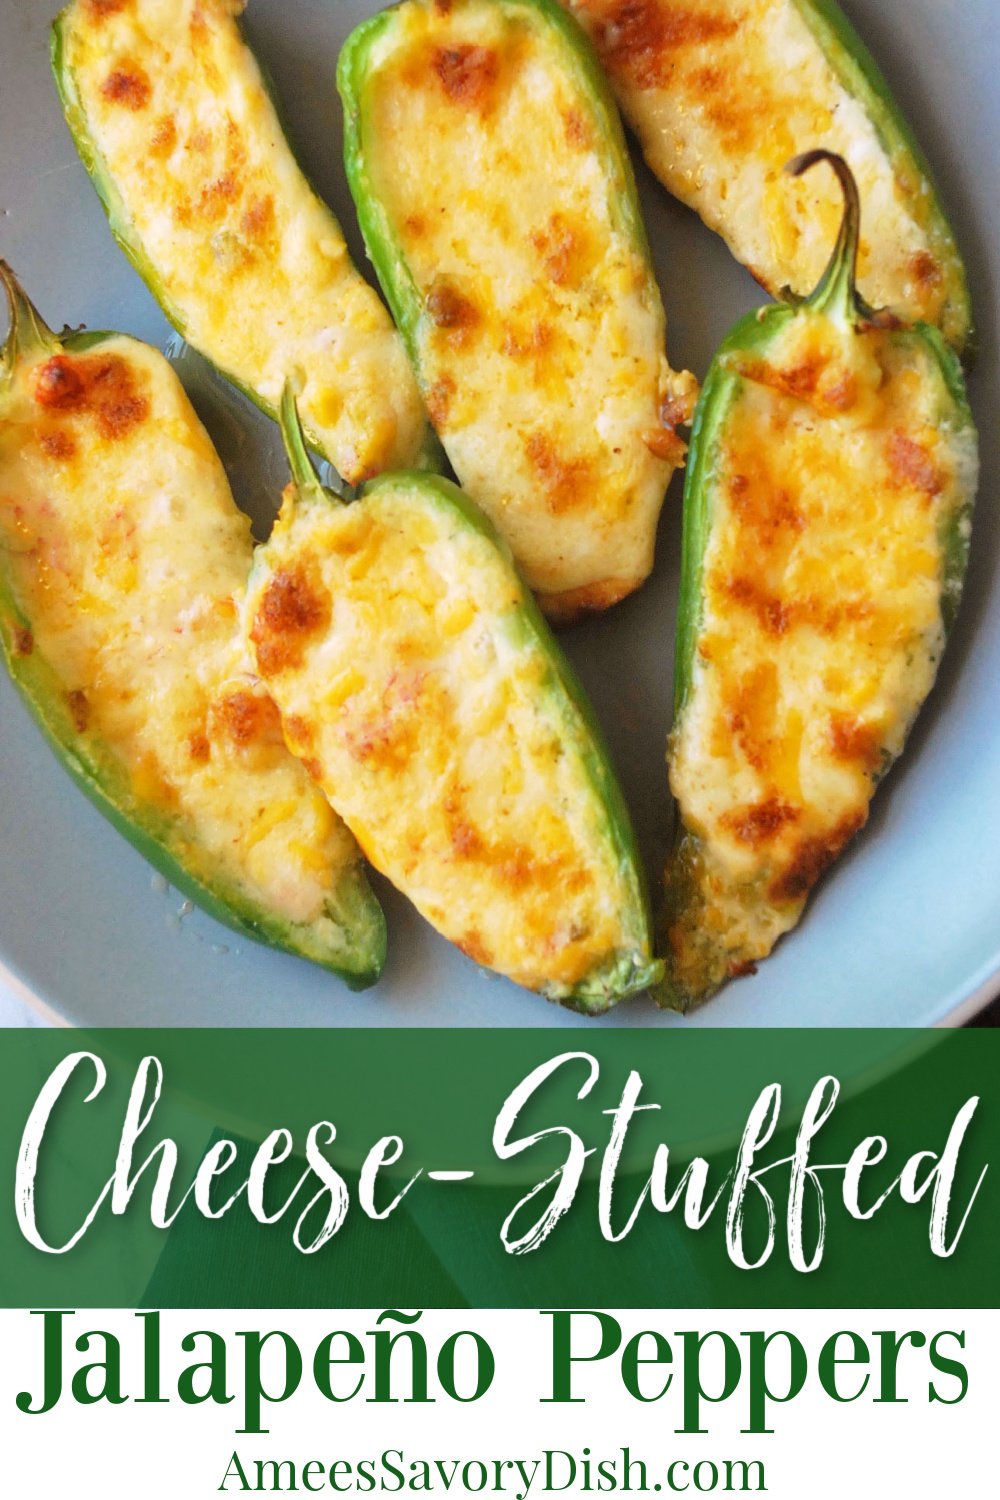 These baked cheese stuffed jalapeño peppers are delicious as an appetizer or game day snacks. Hot peppers are stuffed with a mixture of spicy cheddar cheese and cream cheese, then baked until the peppers are soft and the cheese is melted and golden brown. via @Ameessavorydish